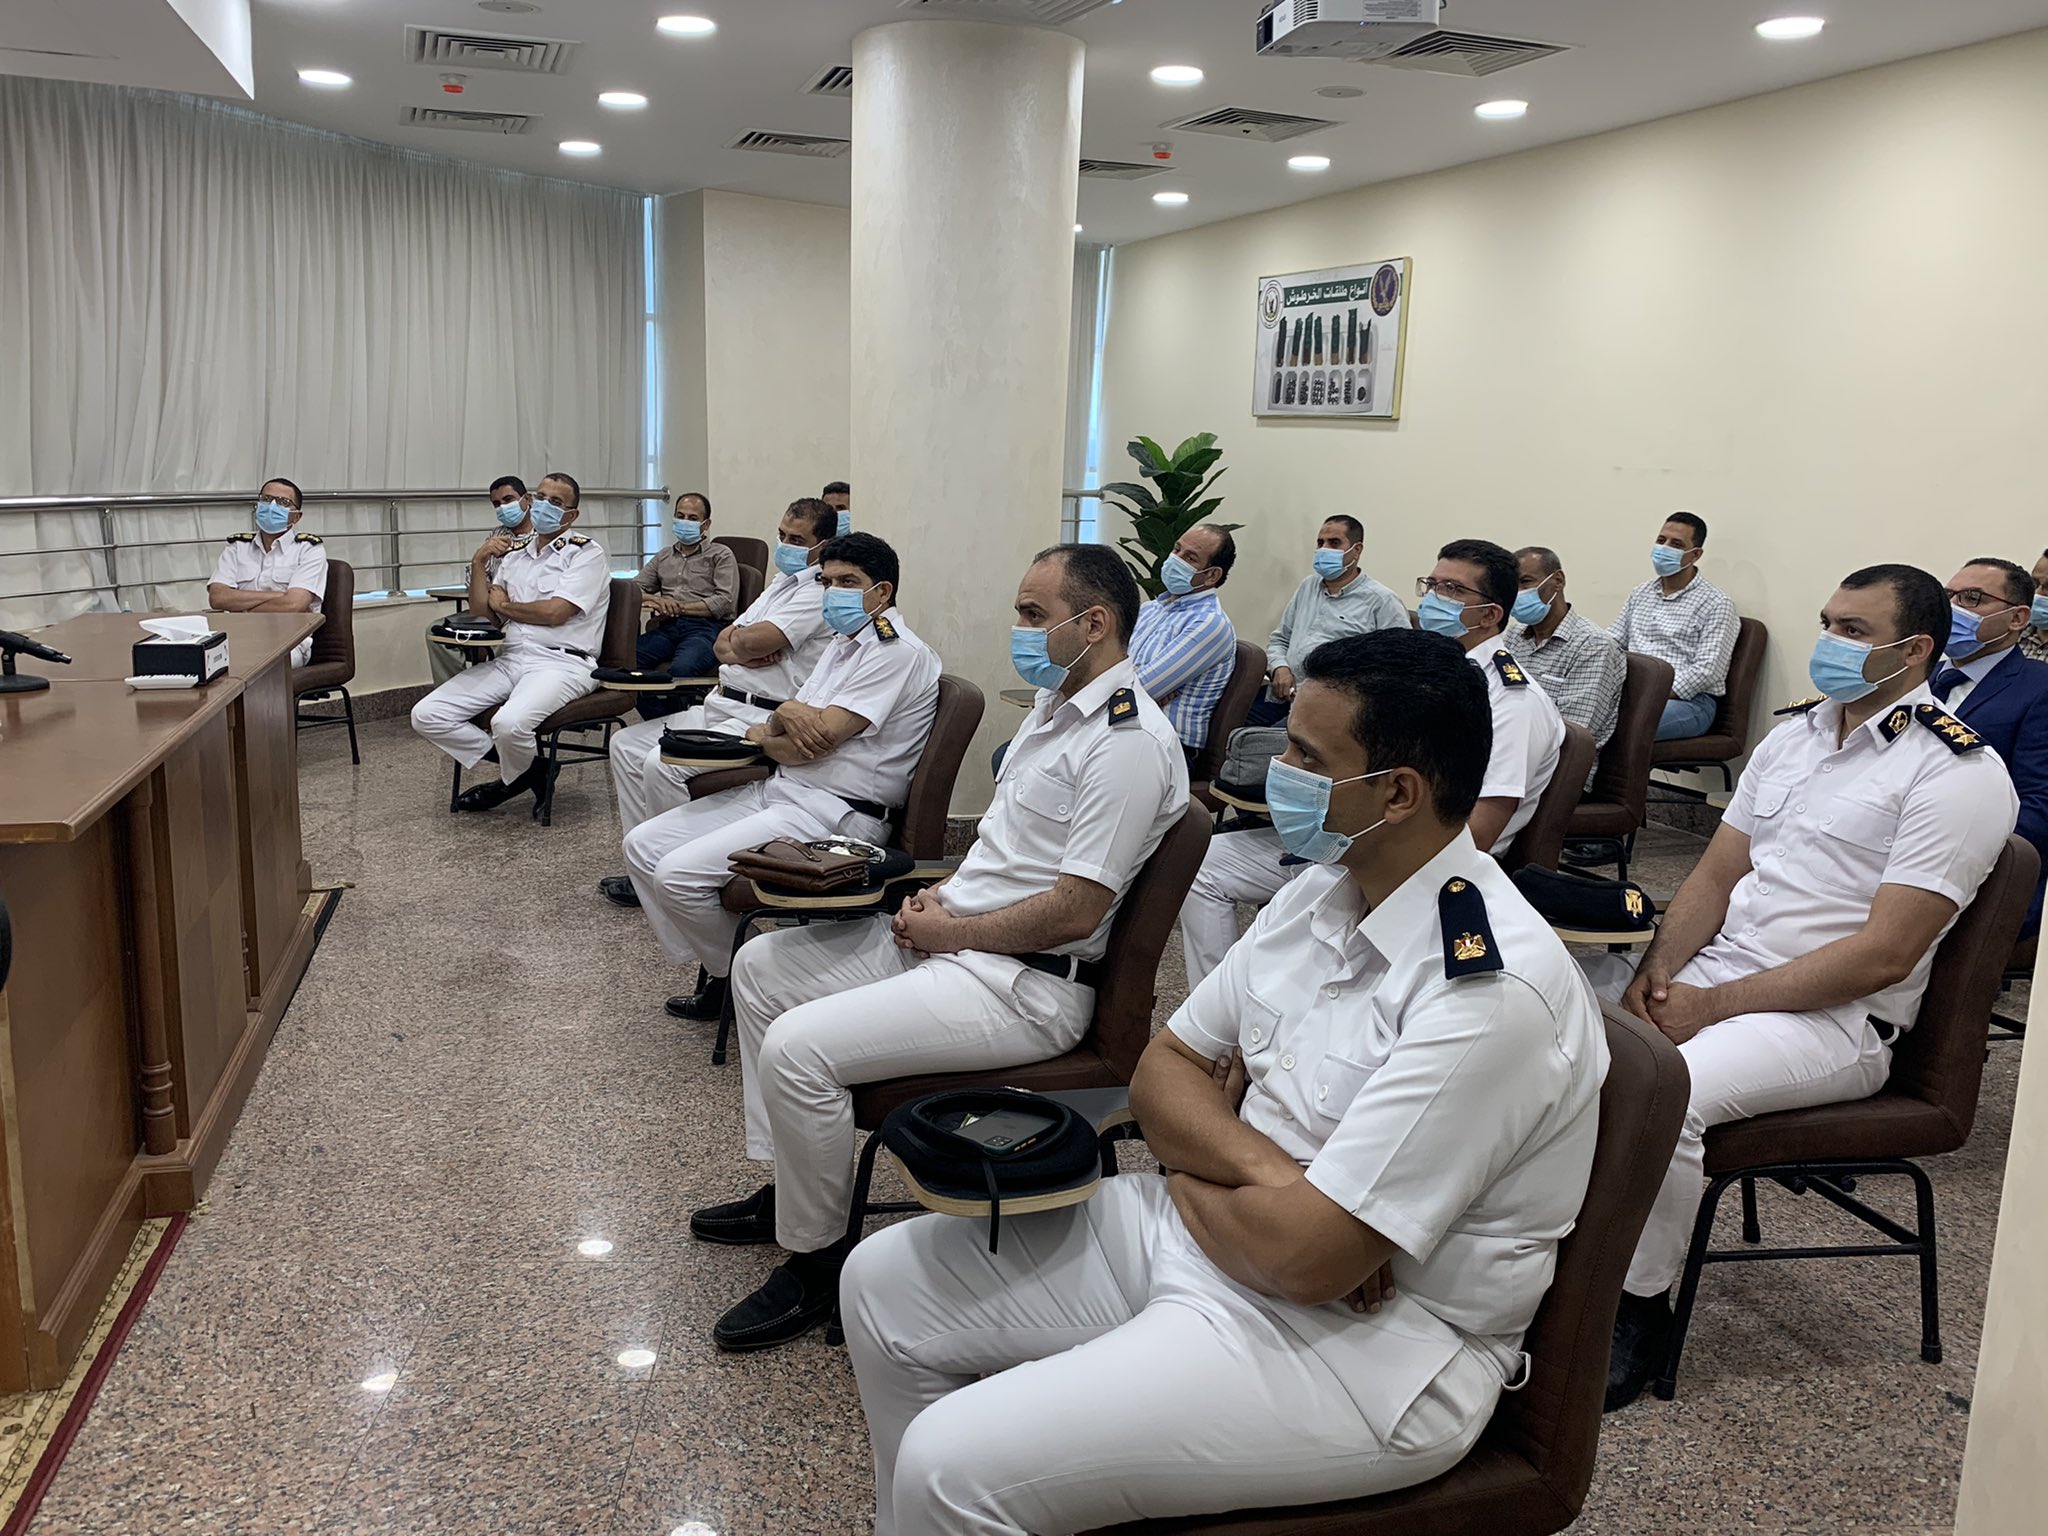 /romena/uploads/res/Stories/2021/September/egypt_-first-training-for-prison-health-staff-on-prevention--treatment-and-care-of-non-communicable-diseases_html/1.jpeg